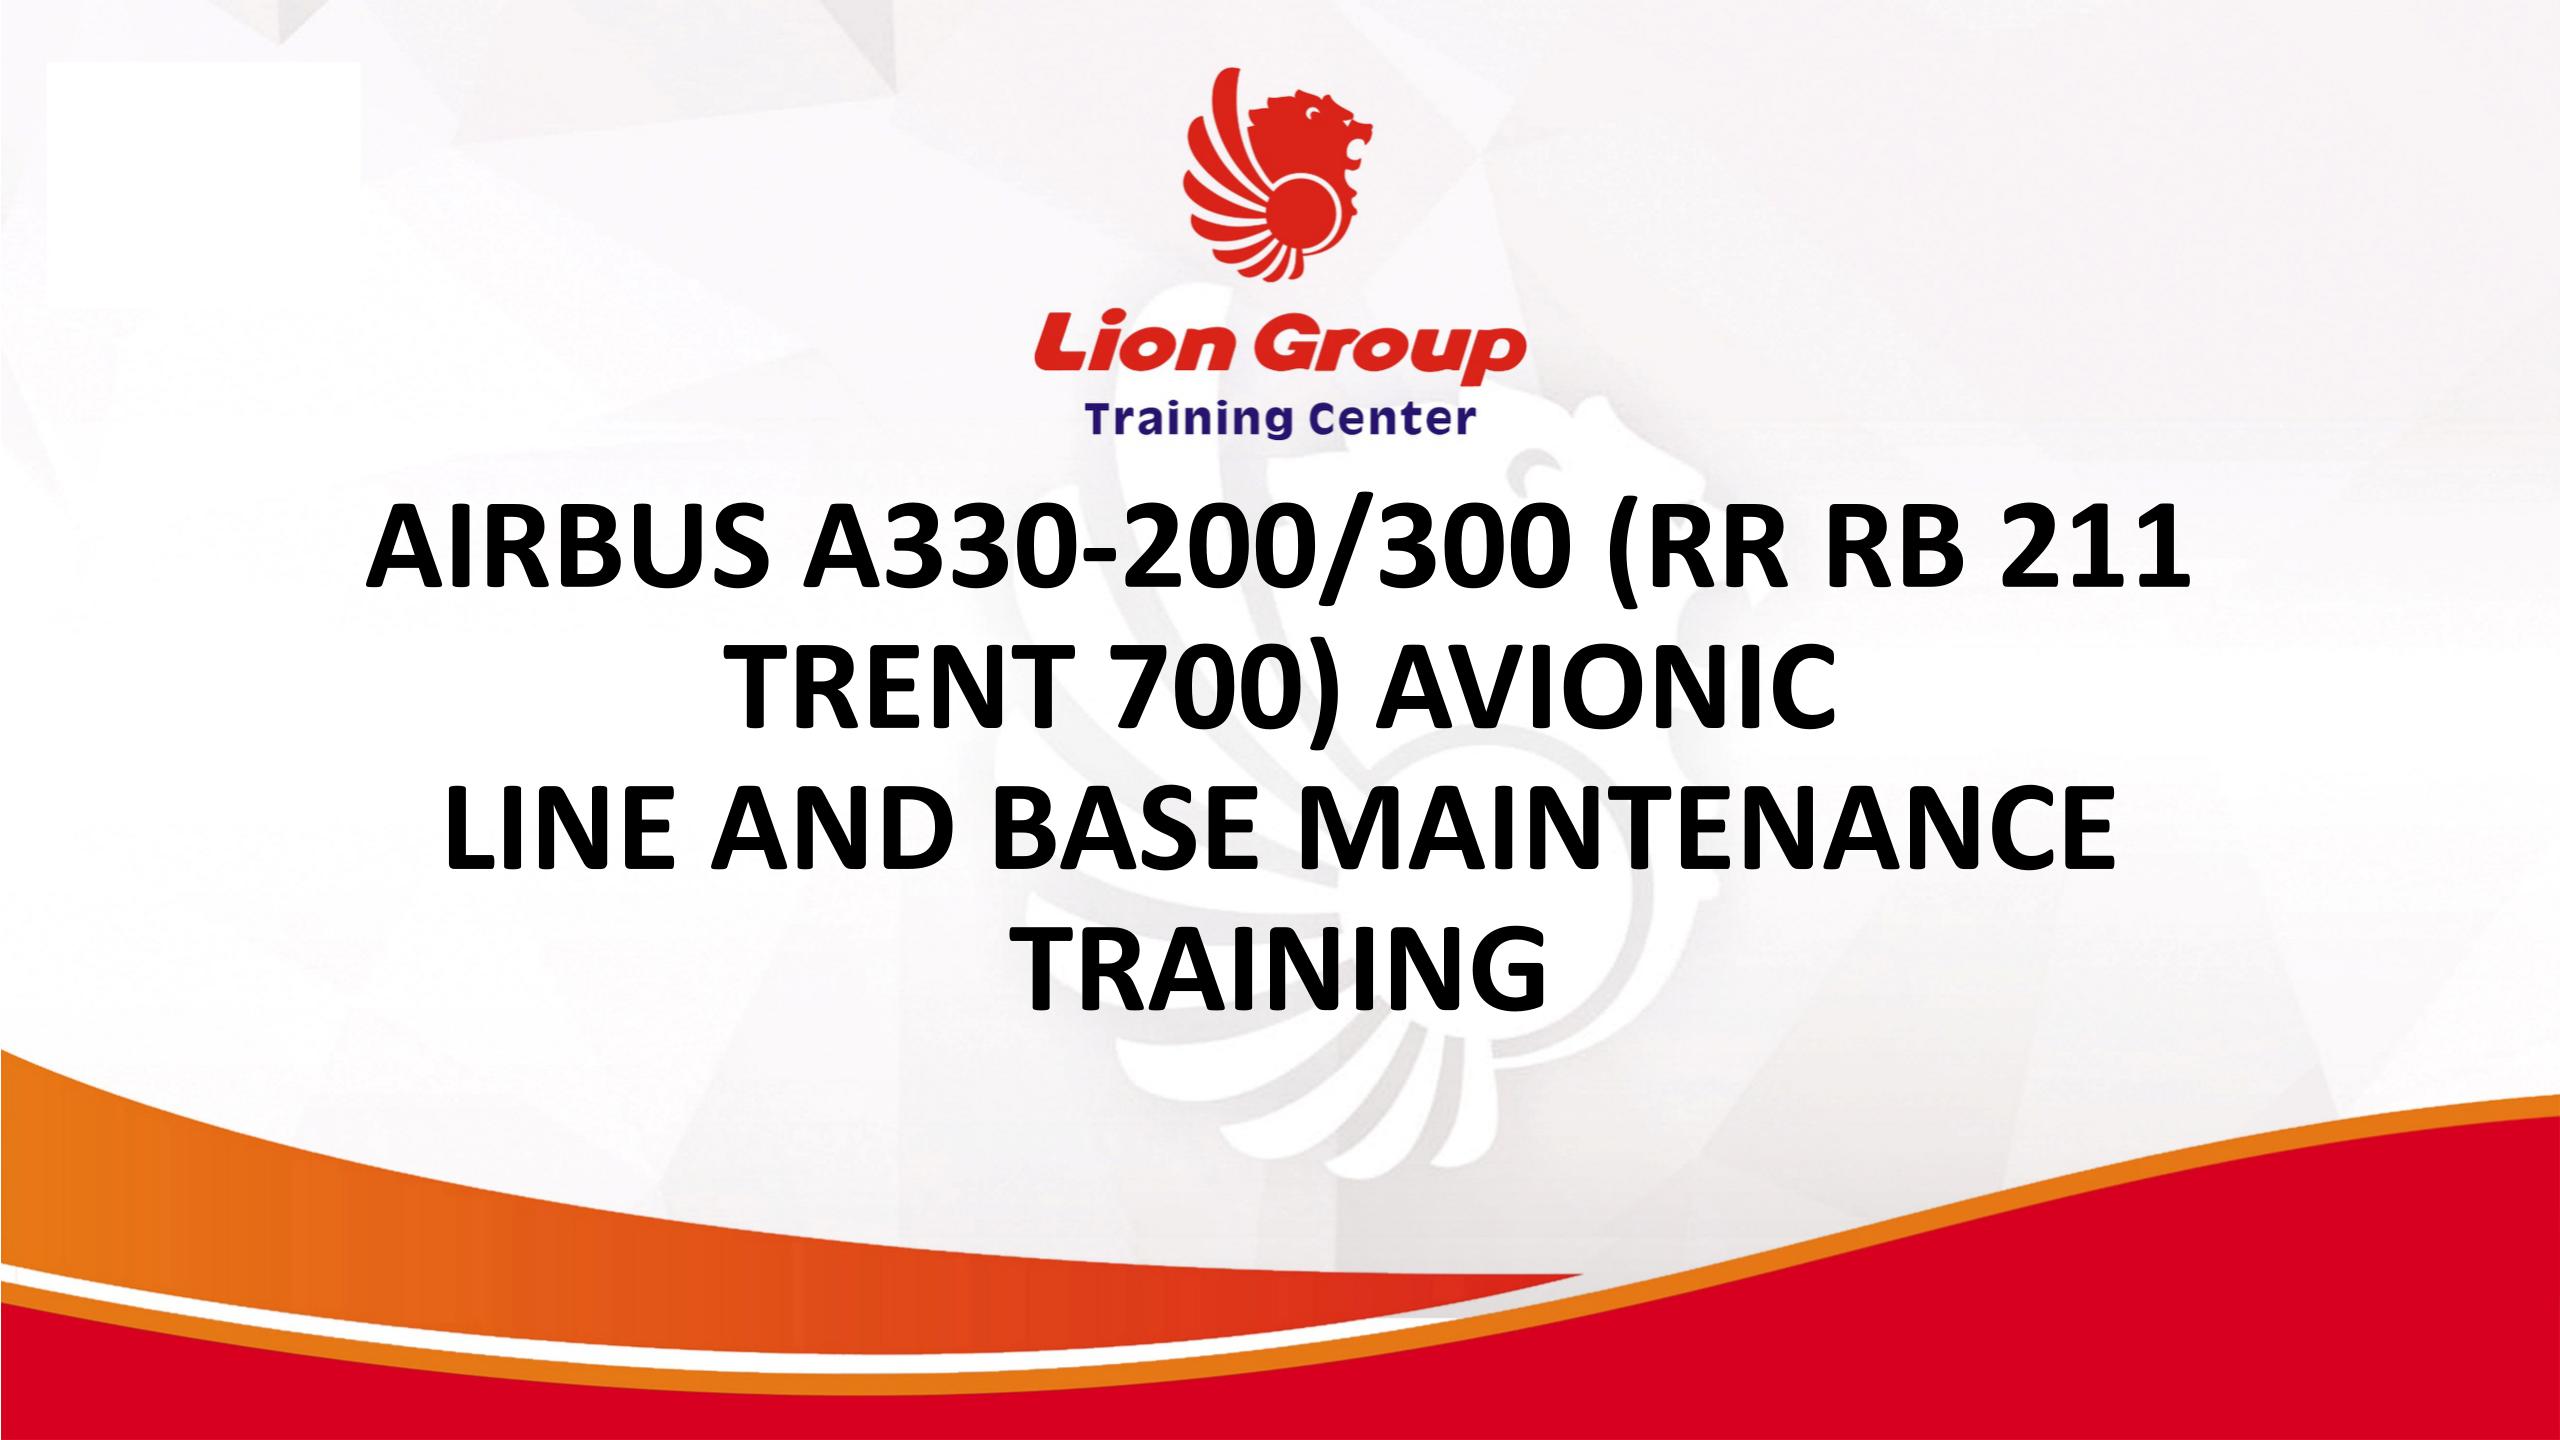 AIRBUS A330-200/300 (RR RB 211 TRENT 700) AVIONIC LINE AND  BASE MAINTENANCE TRAINING